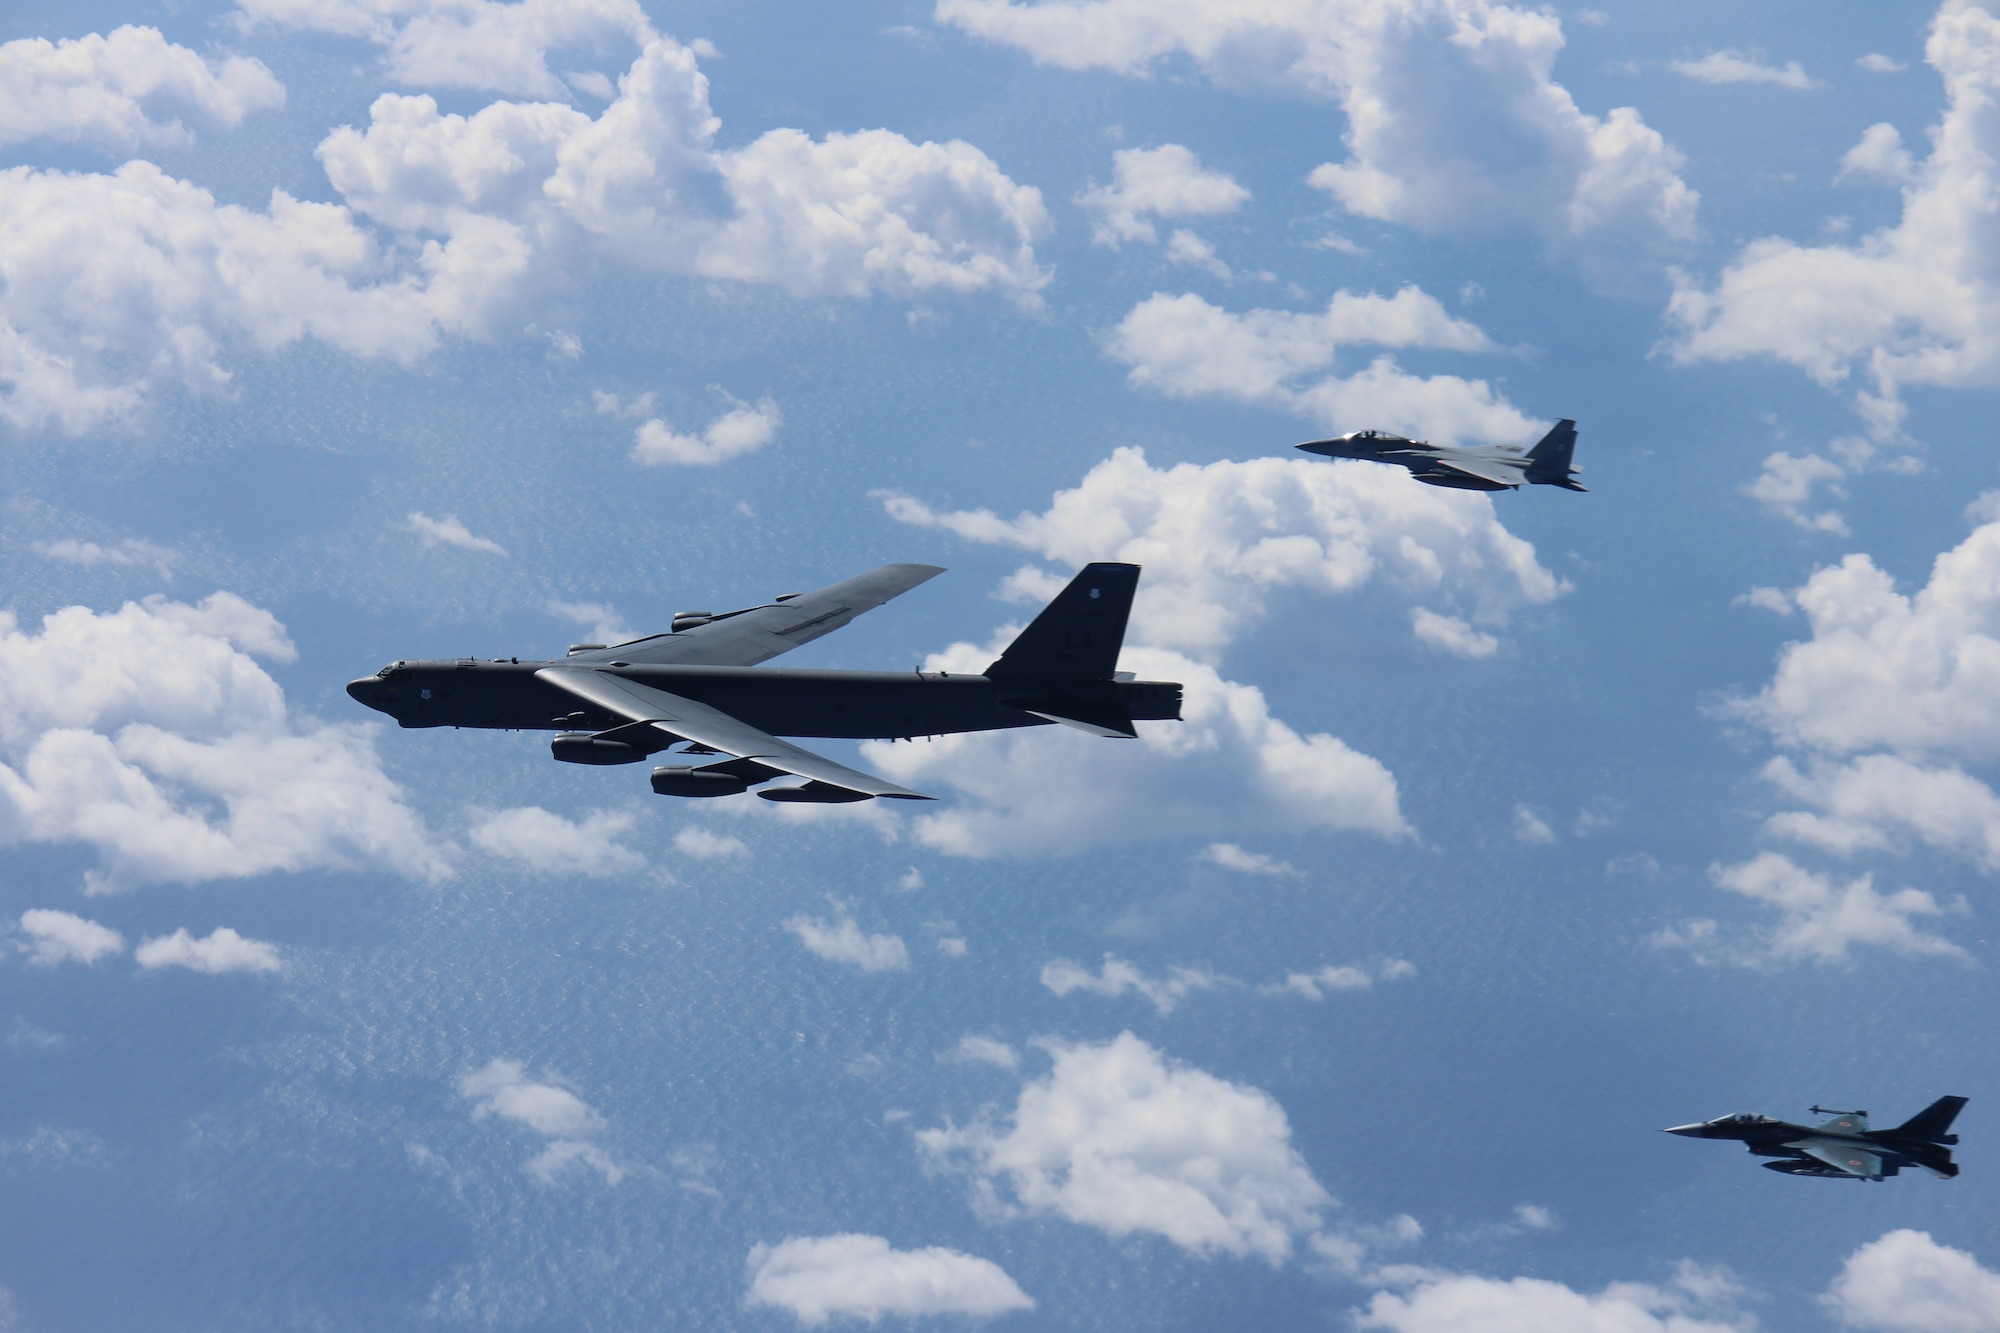 A U.S. Air Force B-52H Stratofortress bomber, Koku Jieitai (Japan Air Self-Defense Force) F-15 fighter and Koku Jieitai F-2 fighter execute a routine bilateral training mission over the East China Sea and the Sea of Japan, Sept. 26, 2018.